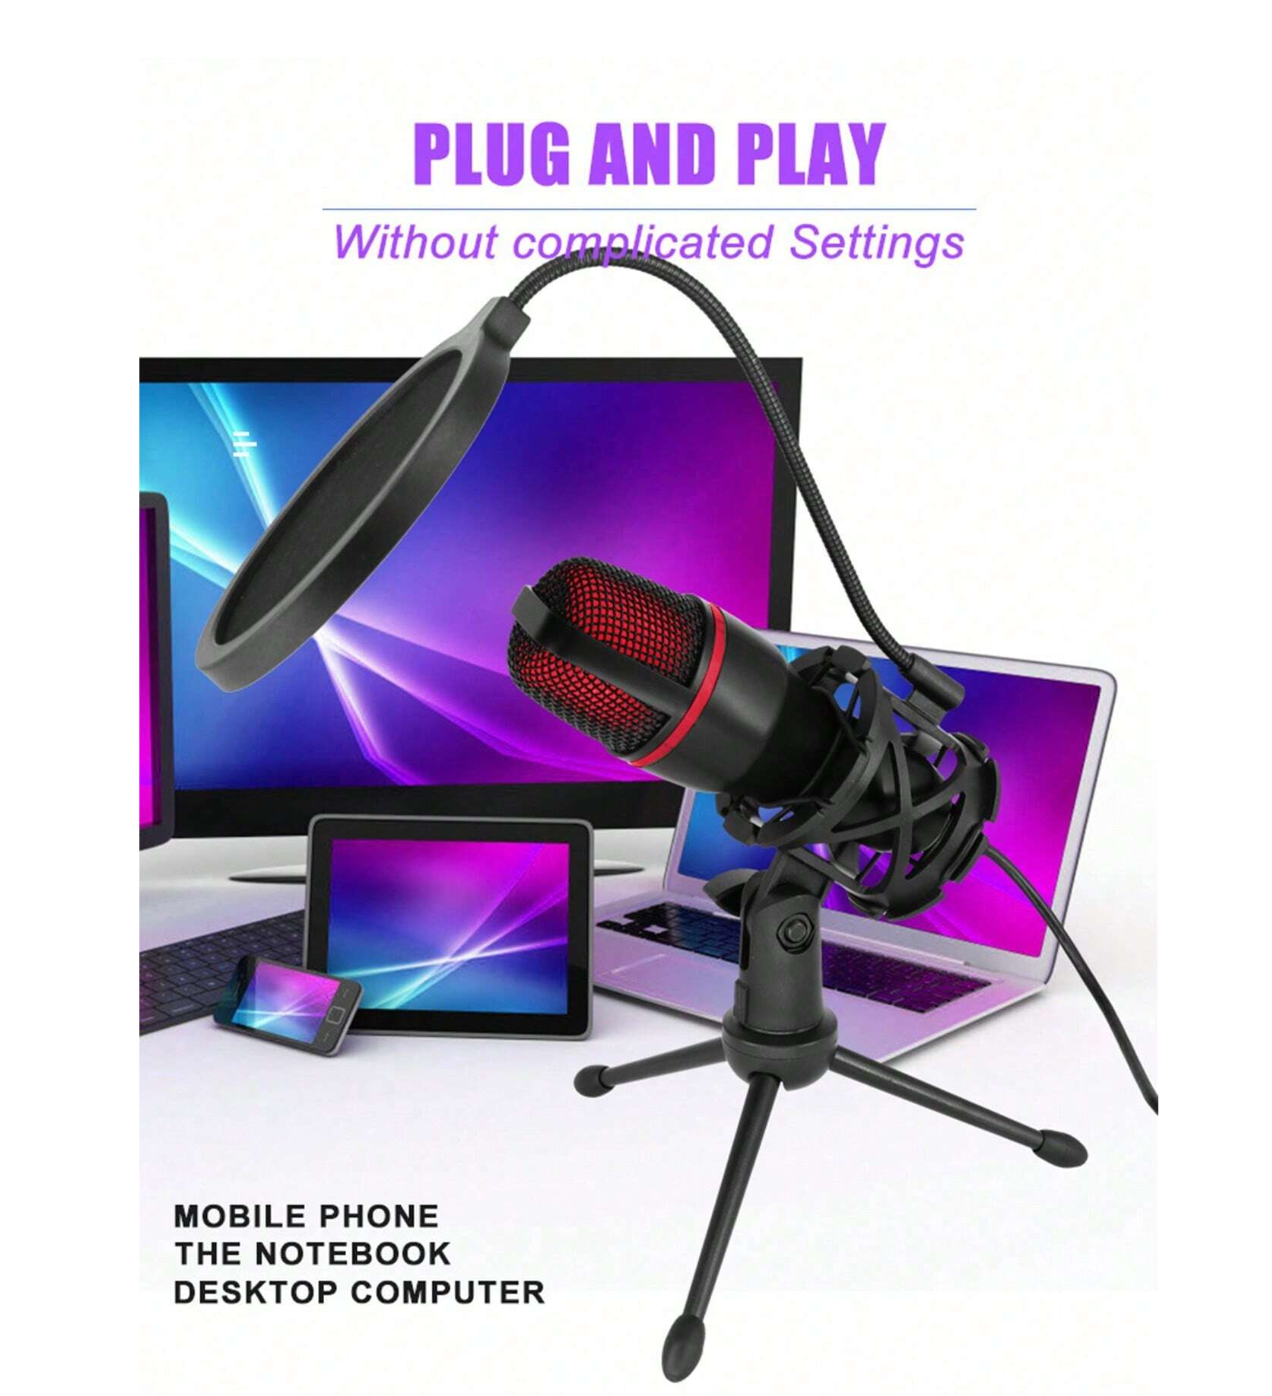 Studio Sound Oasis: 3.5mm Wired Home Stereo Microphone Stand – Elevate Your PC, Video Chat, Gaming, Podcasting, Meetings, and Beyond!